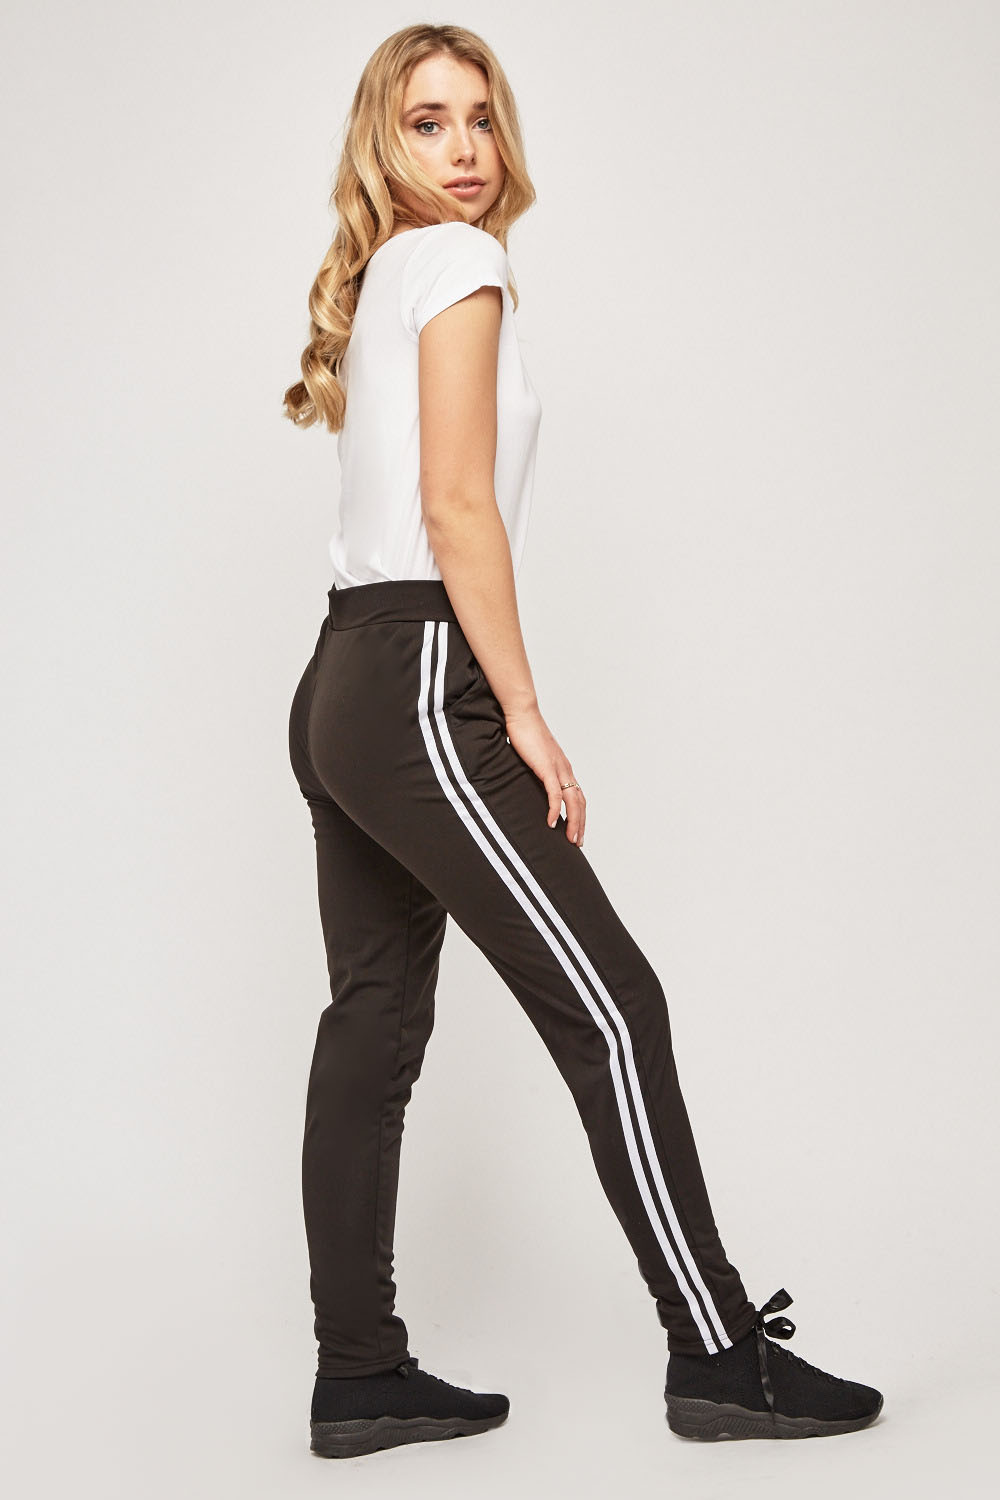 Stripe Side Jogger Style Pants Just 7